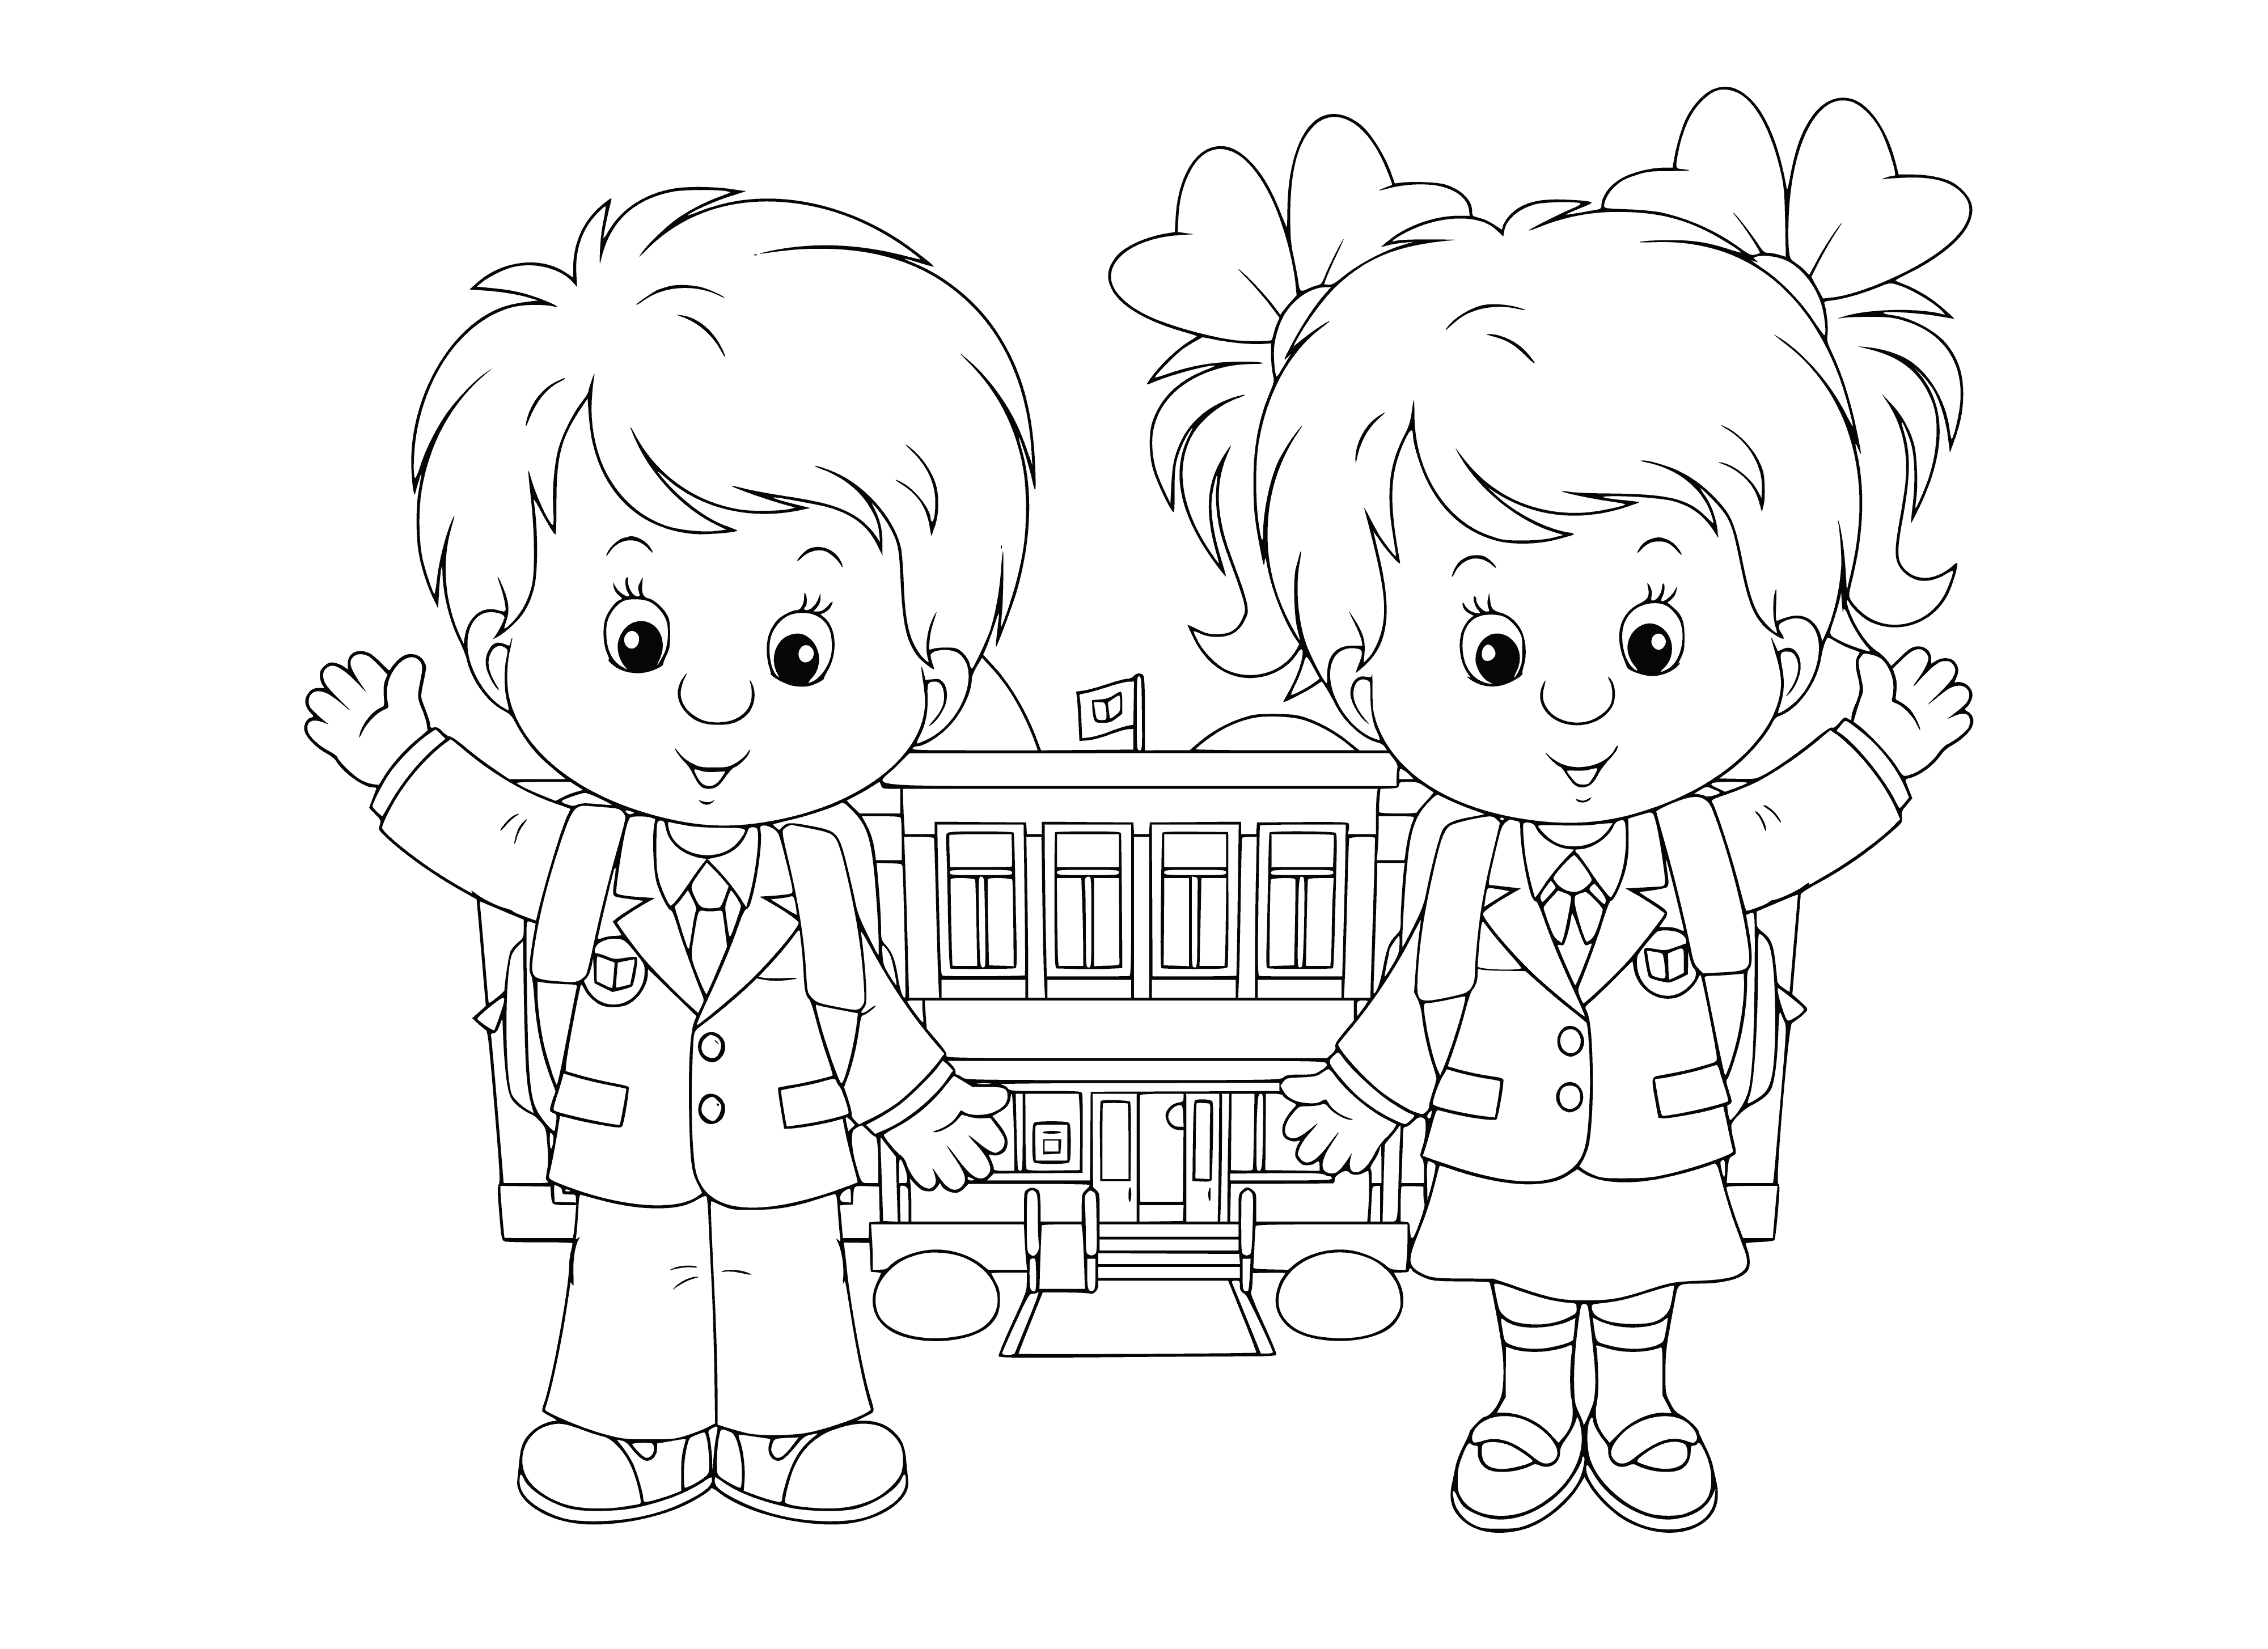 Children around the school coloring page